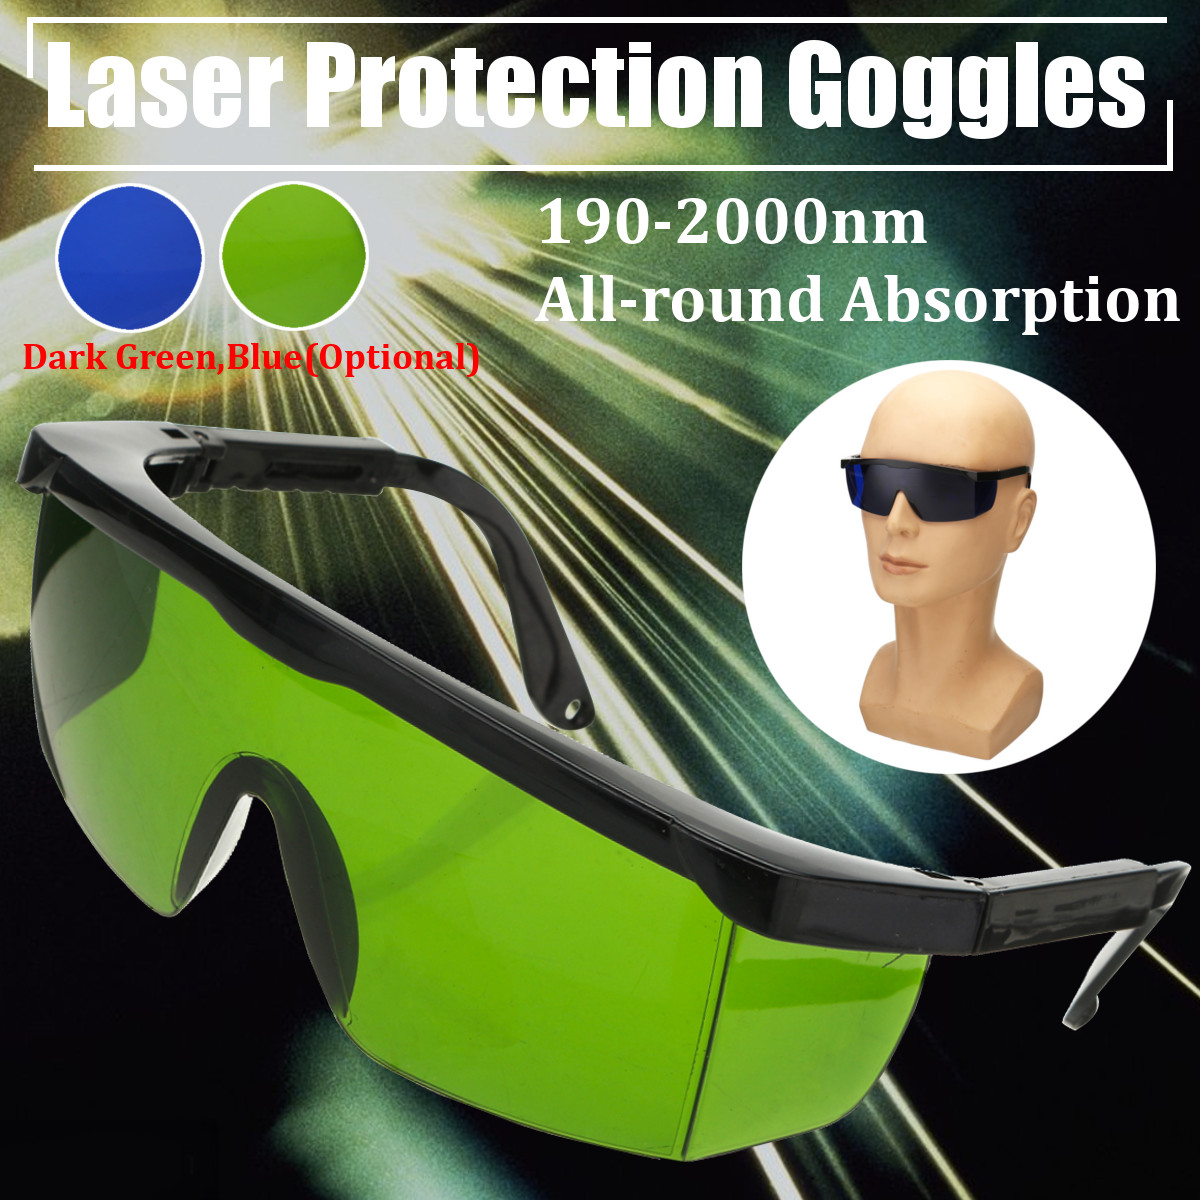 Pro Laser Protection Goggles Protective Safety Glasses IPL OD+4D 190nm-2000nm Laser Goggles 15